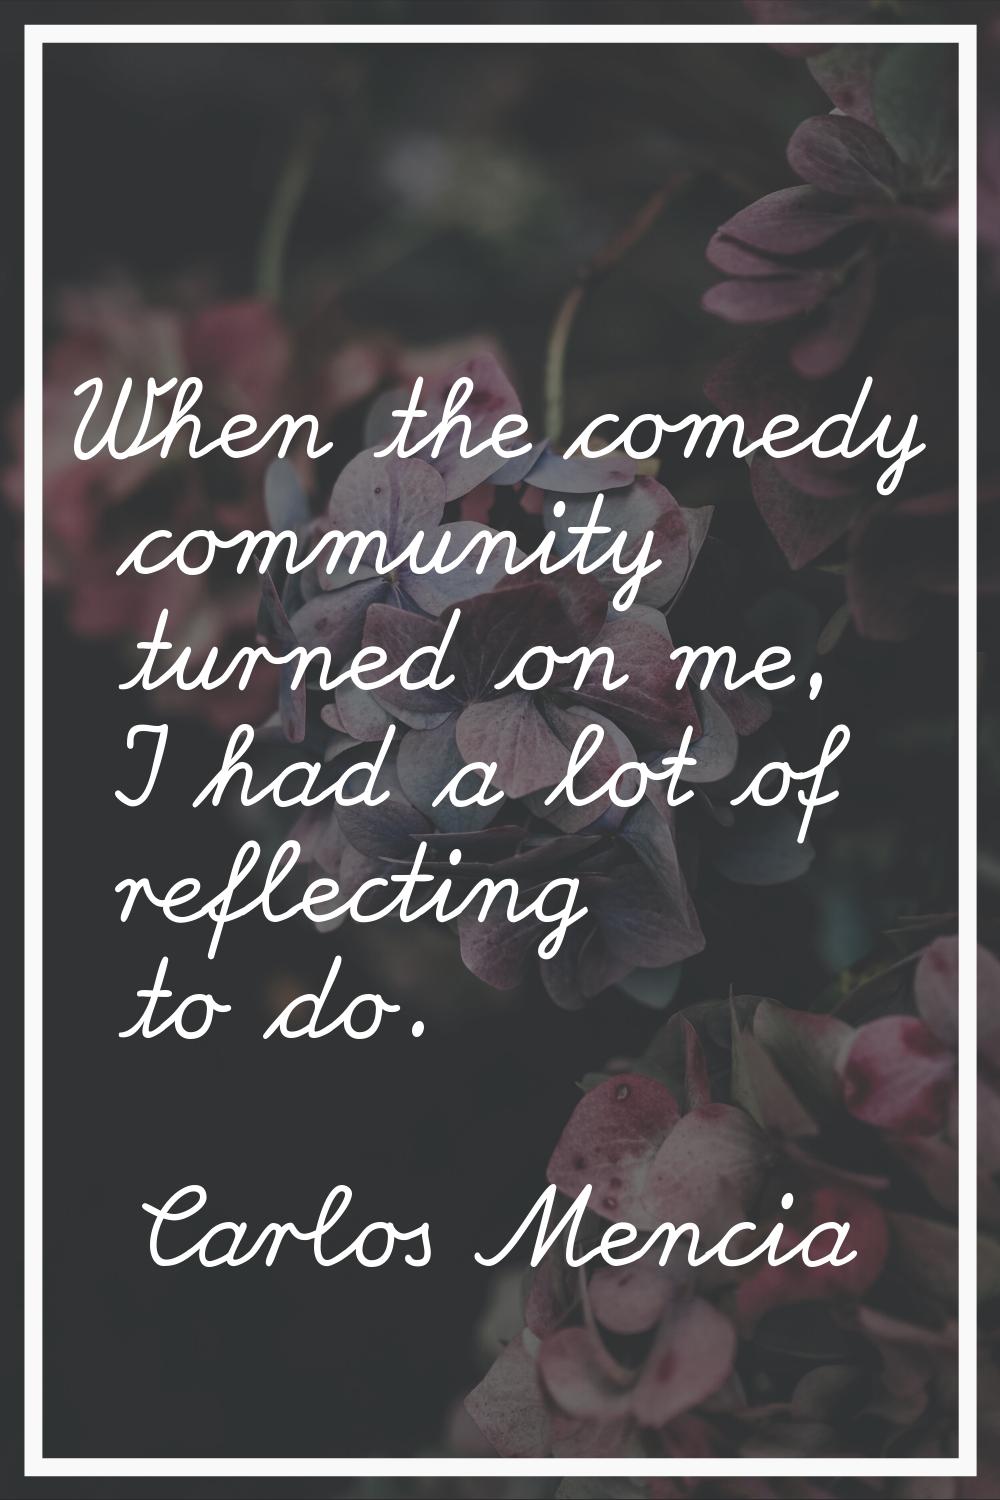 When the comedy community turned on me, I had a lot of reflecting to do.